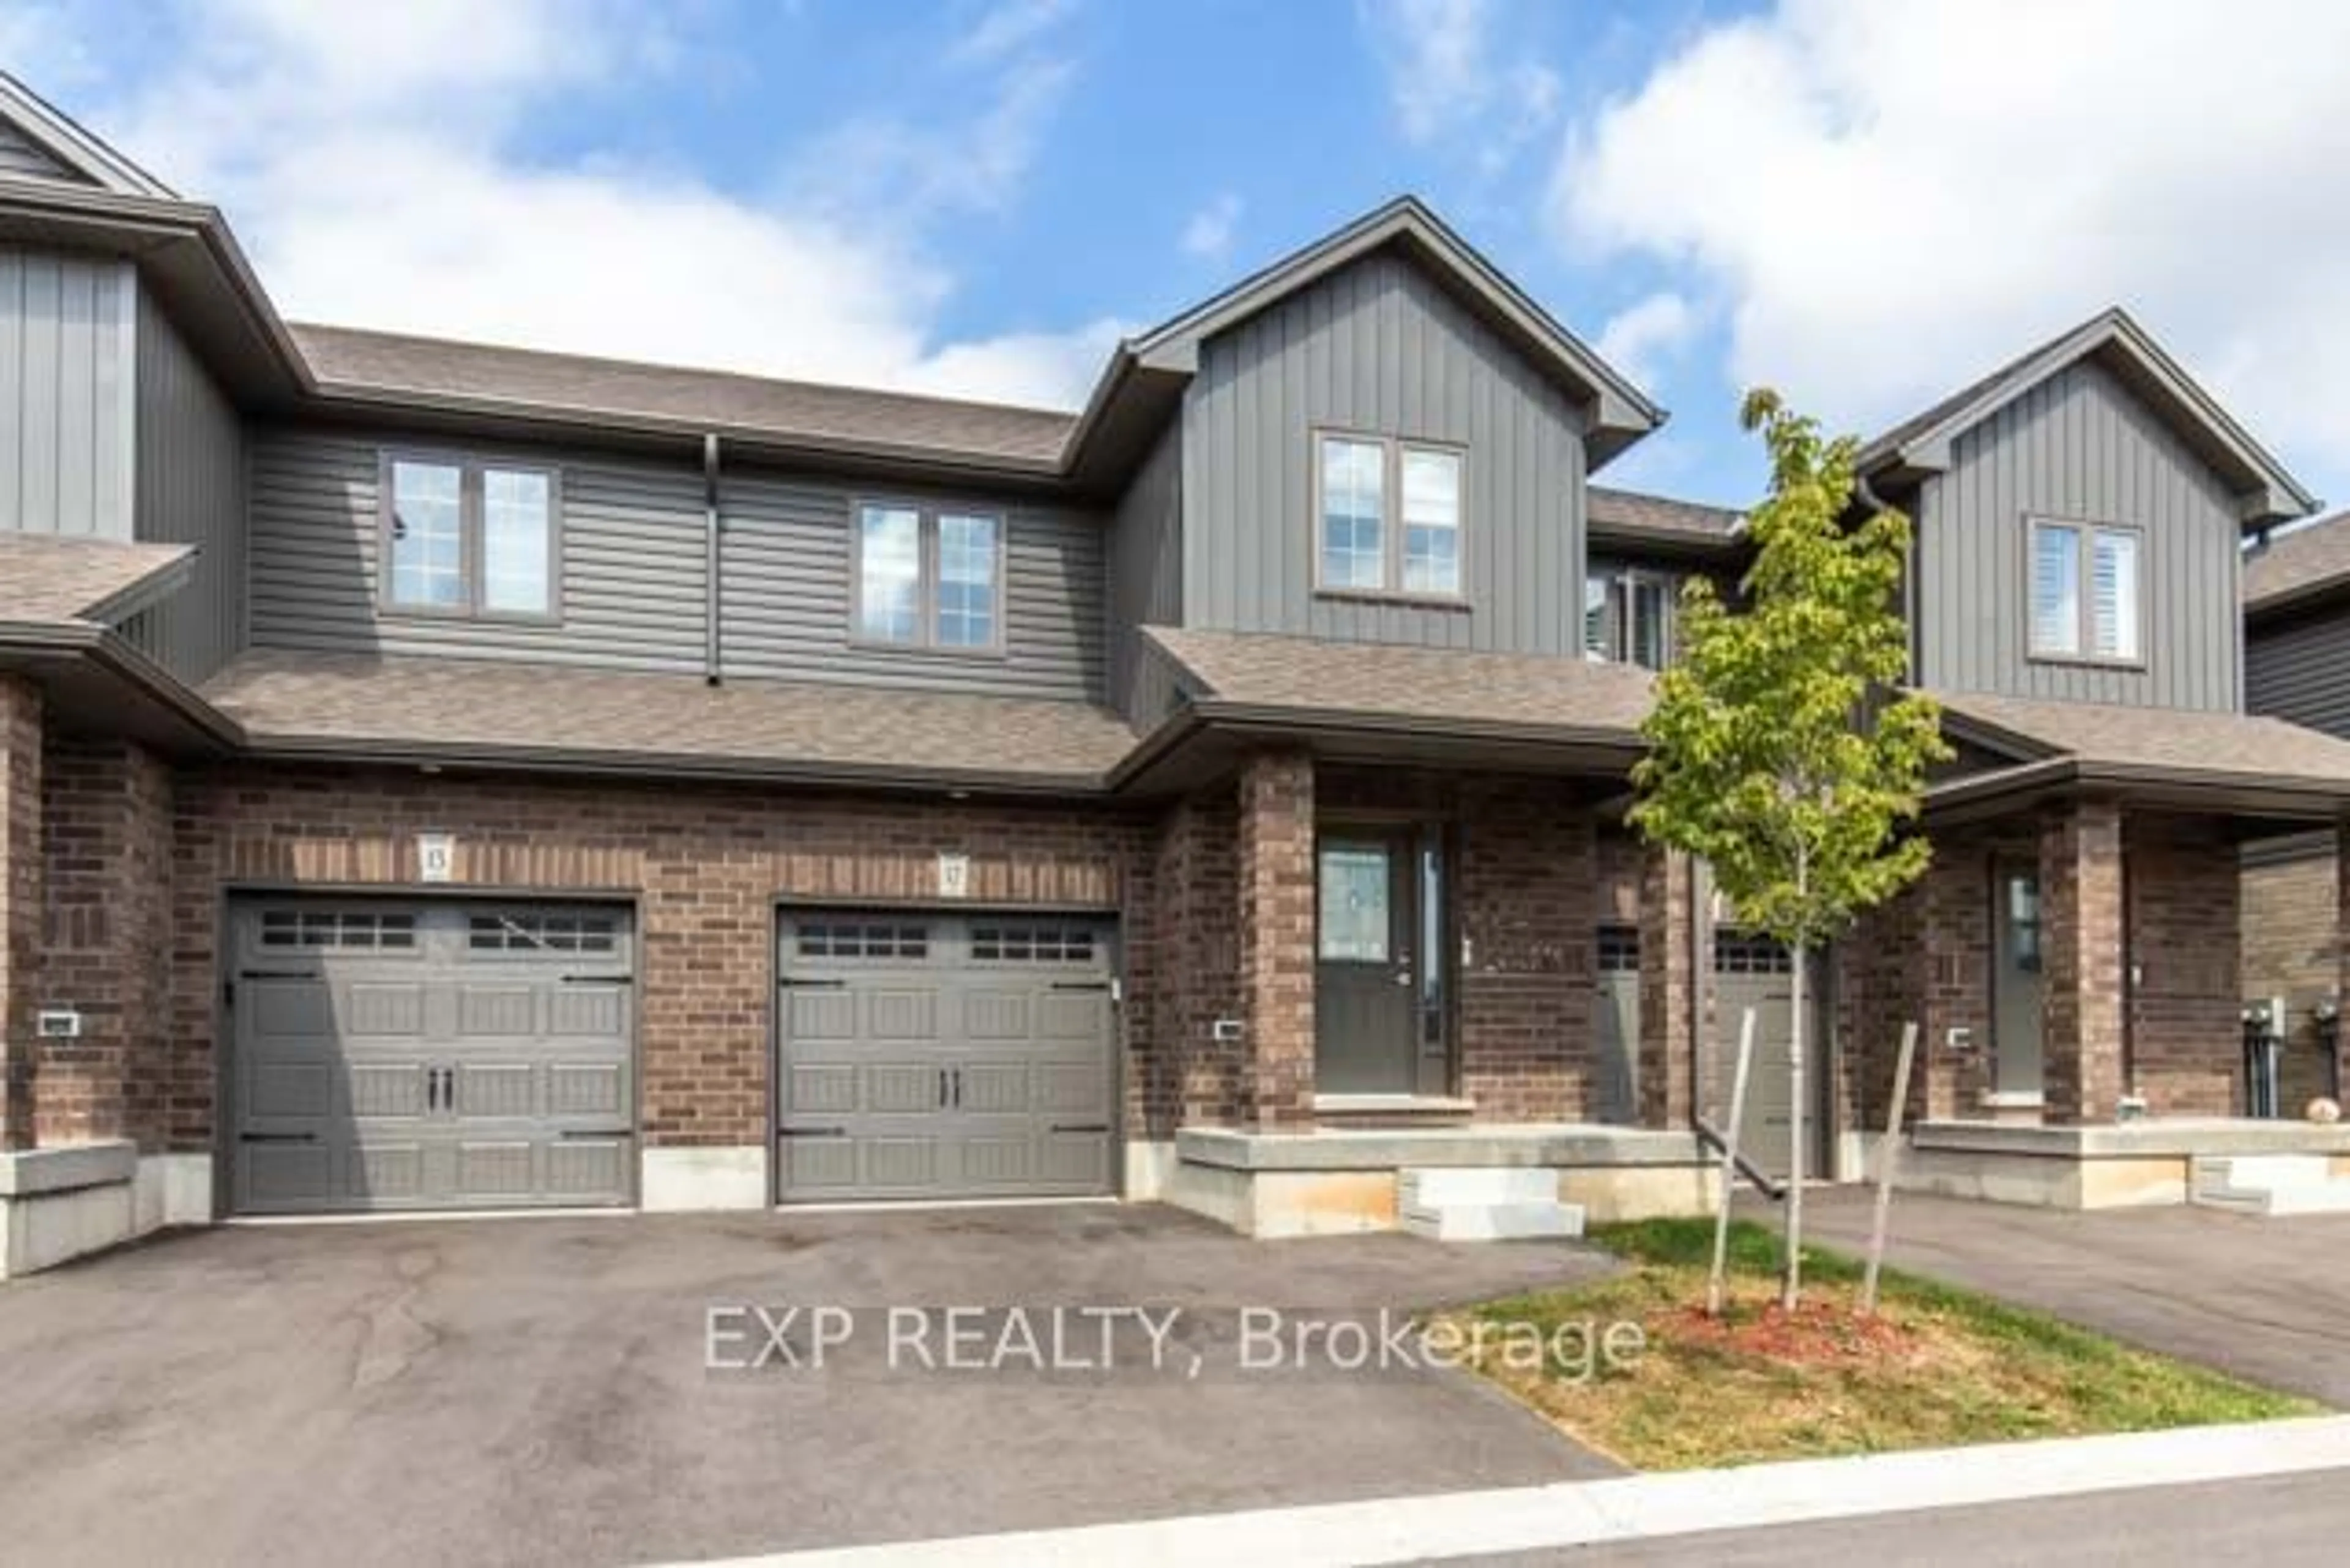 Home with brick exterior material for 29 Schuyler St #12, Brant Ontario N3L 0J2